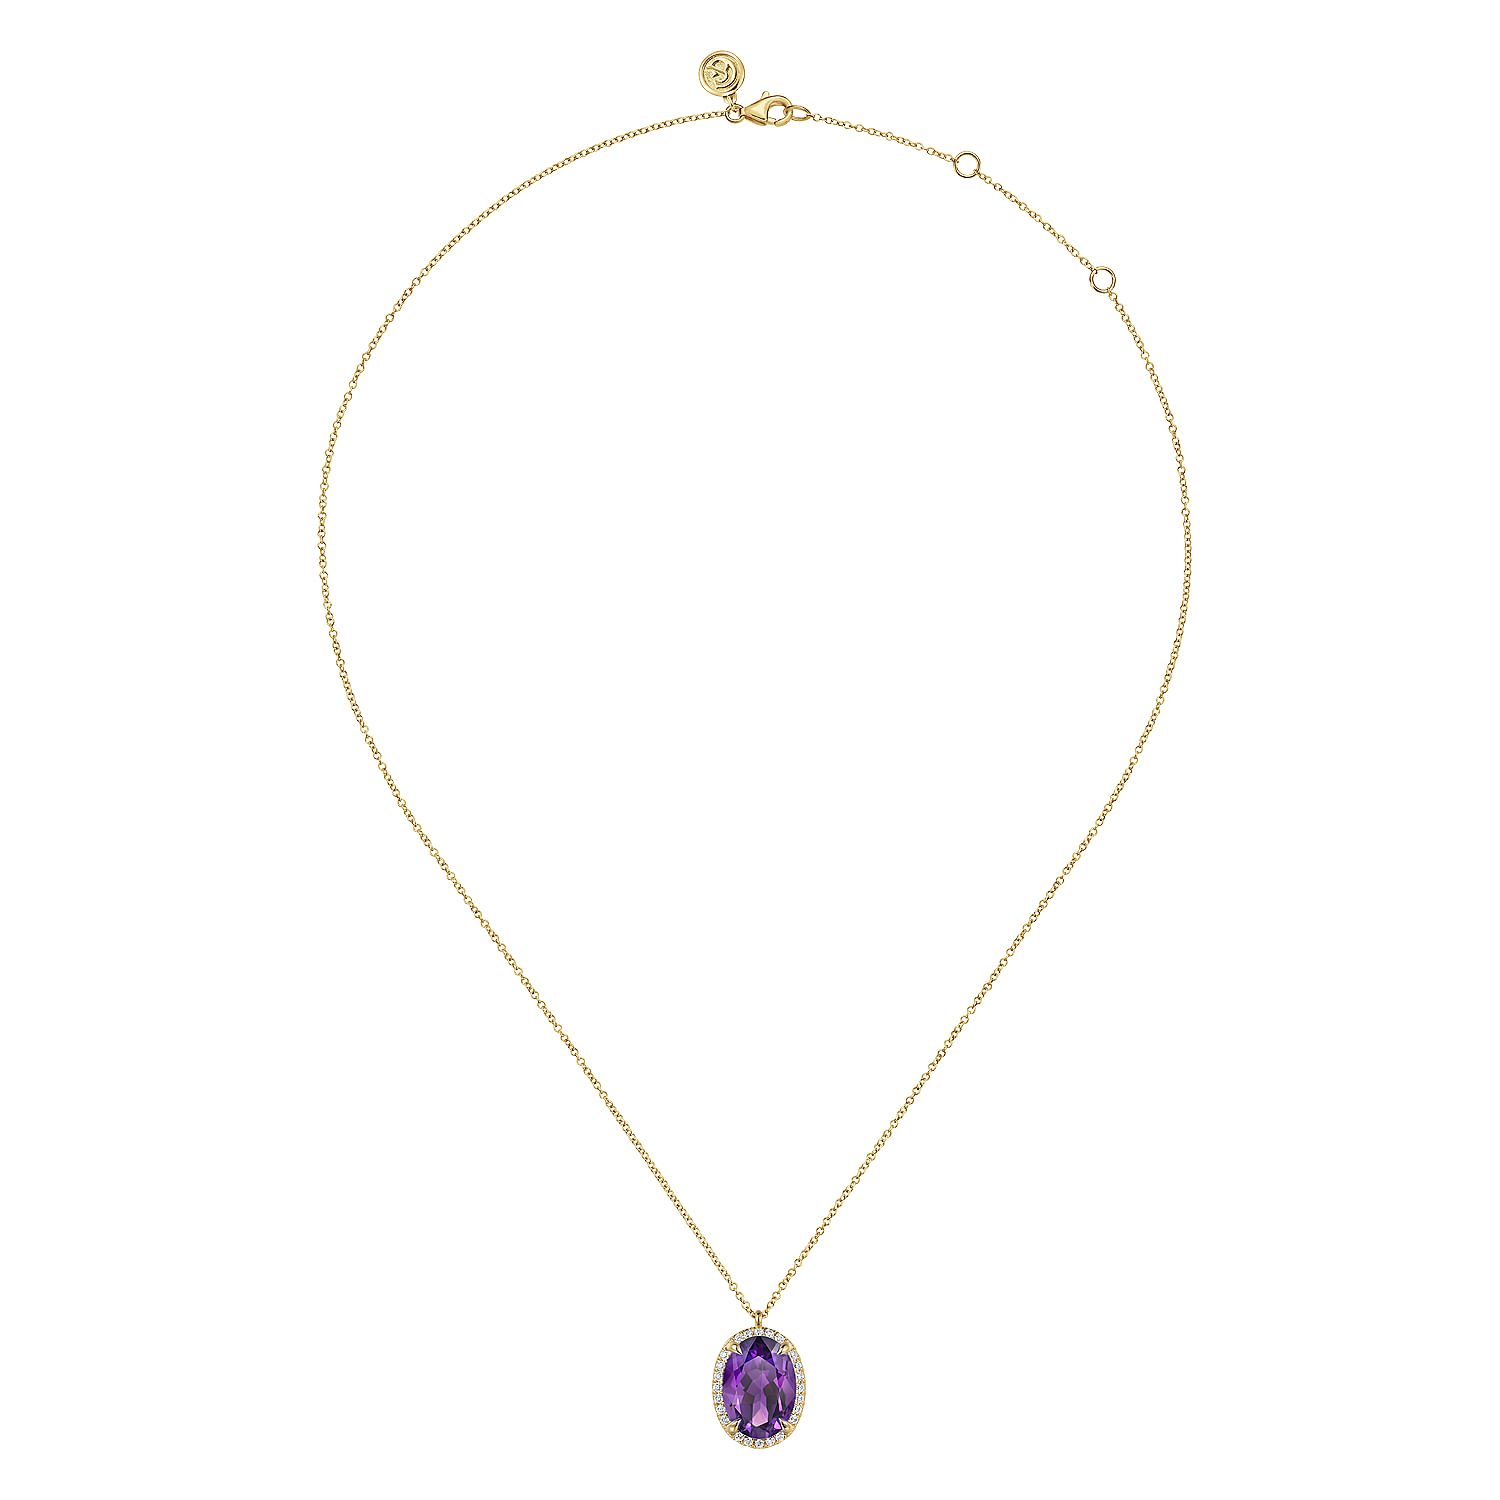 14K Yellow Gold Diamond and Oval Shape Amethyst Necklace With Flower Pattern J-Back